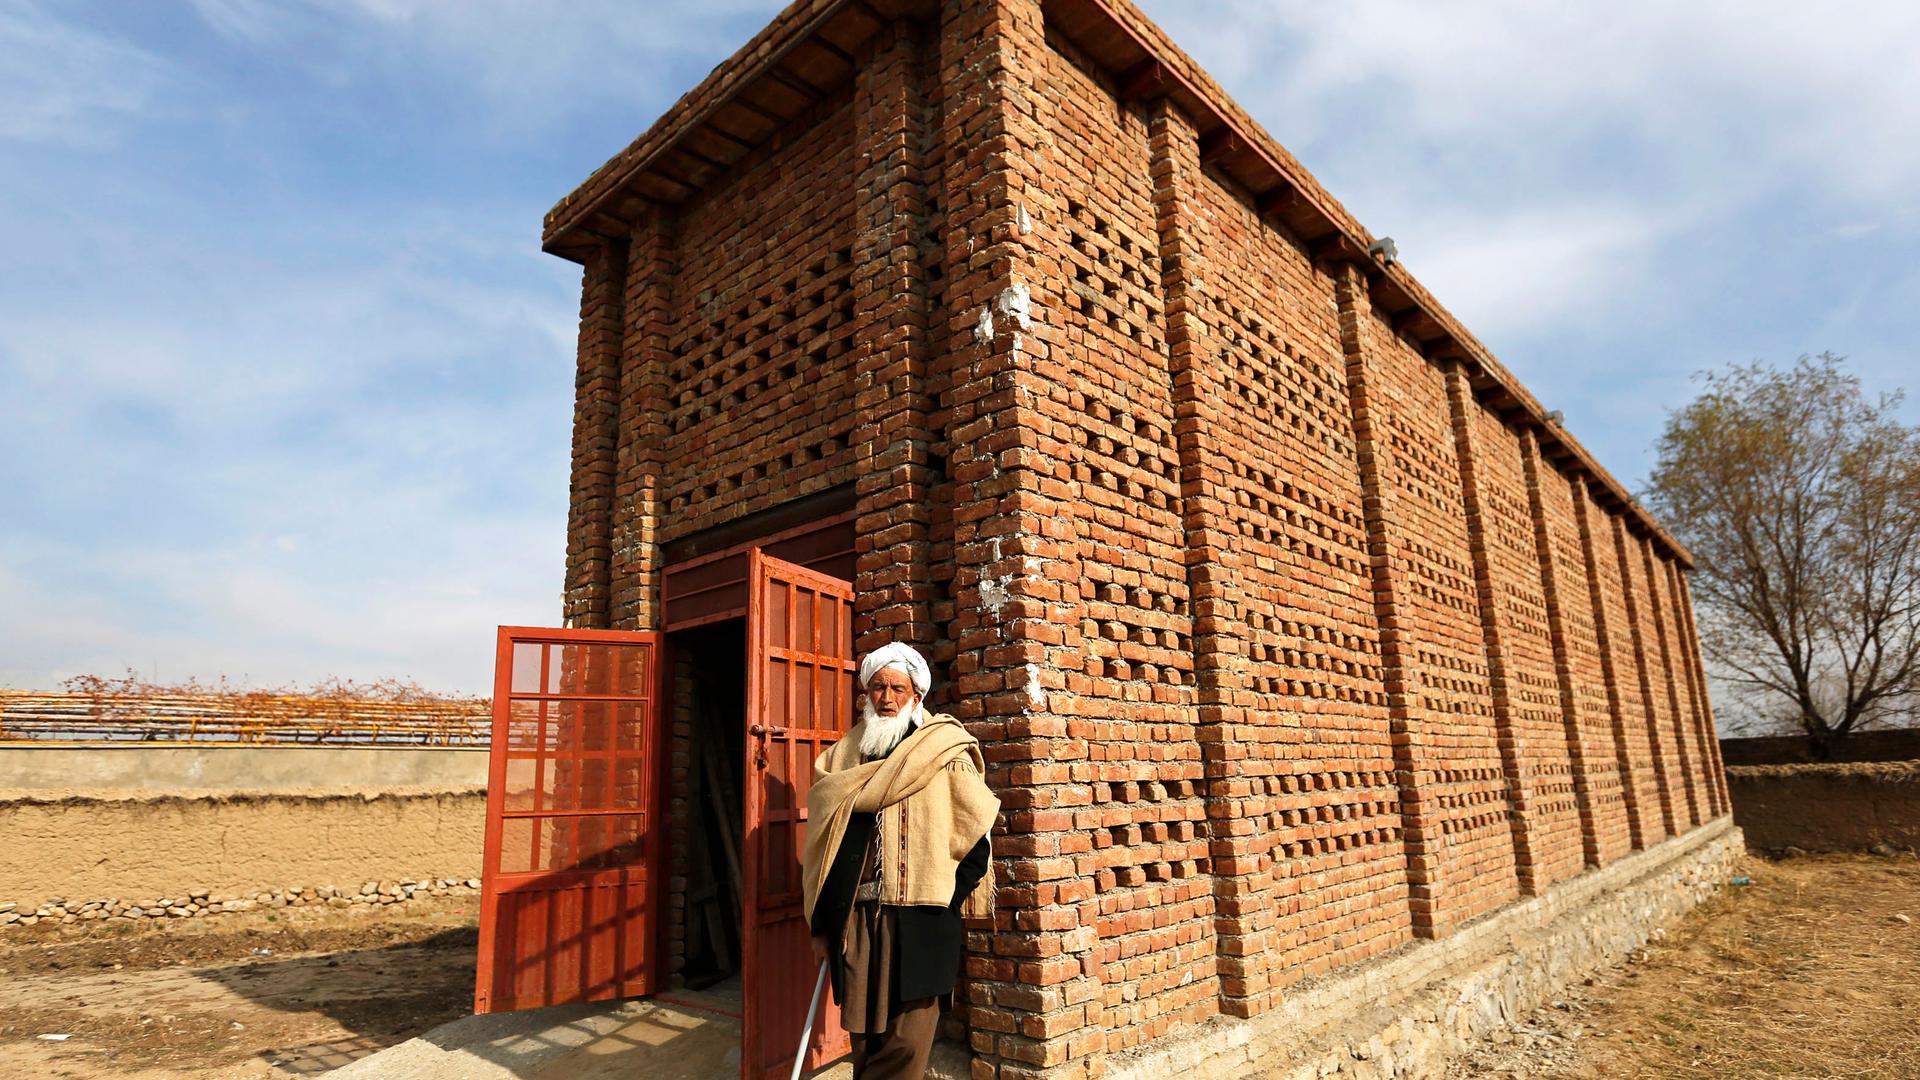 A man stands in front of a brick building in rural setting